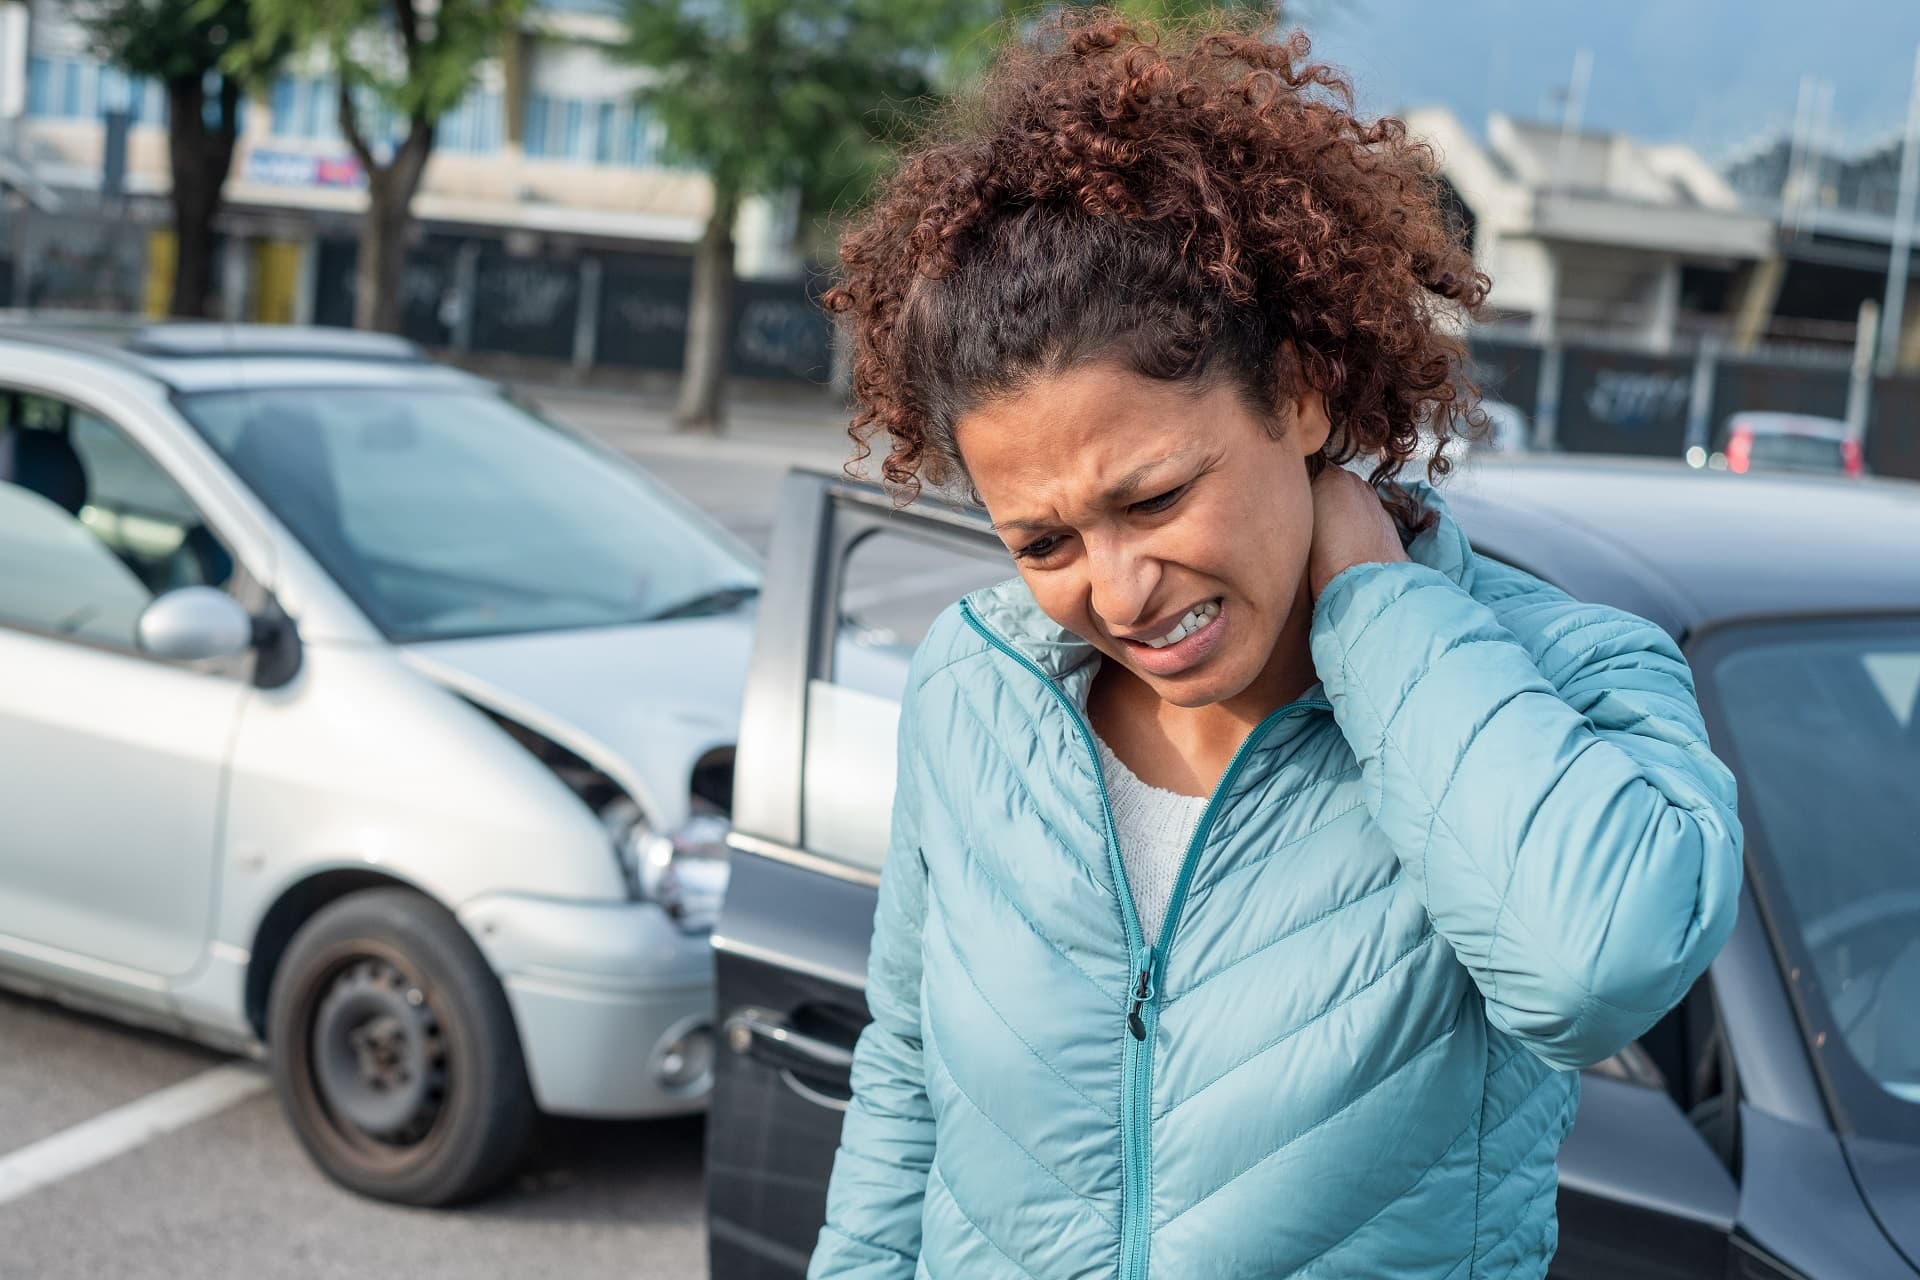 Woman suffering whiplash after bad cars pile up